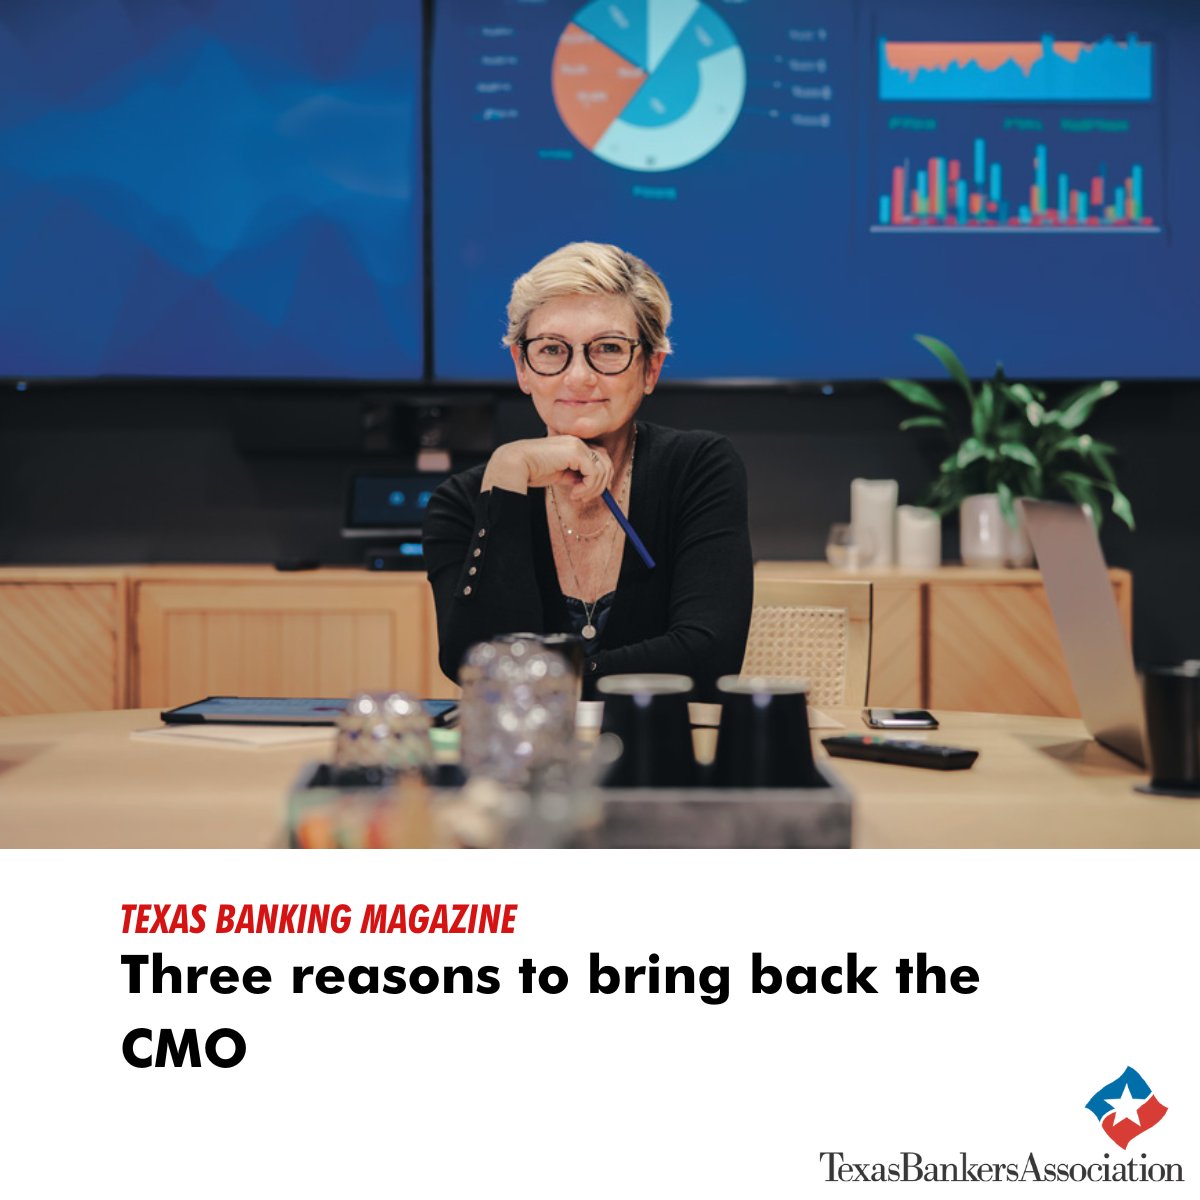 The chief marketing officer can guide your bank to revenue growth. Read the three reasons why every industry needs a CMO in the feature by Corey Wrinn, managing director at Rivel Banking Research: bit.ly/3wfecyq

#StrongBanks #StrongerCommunities